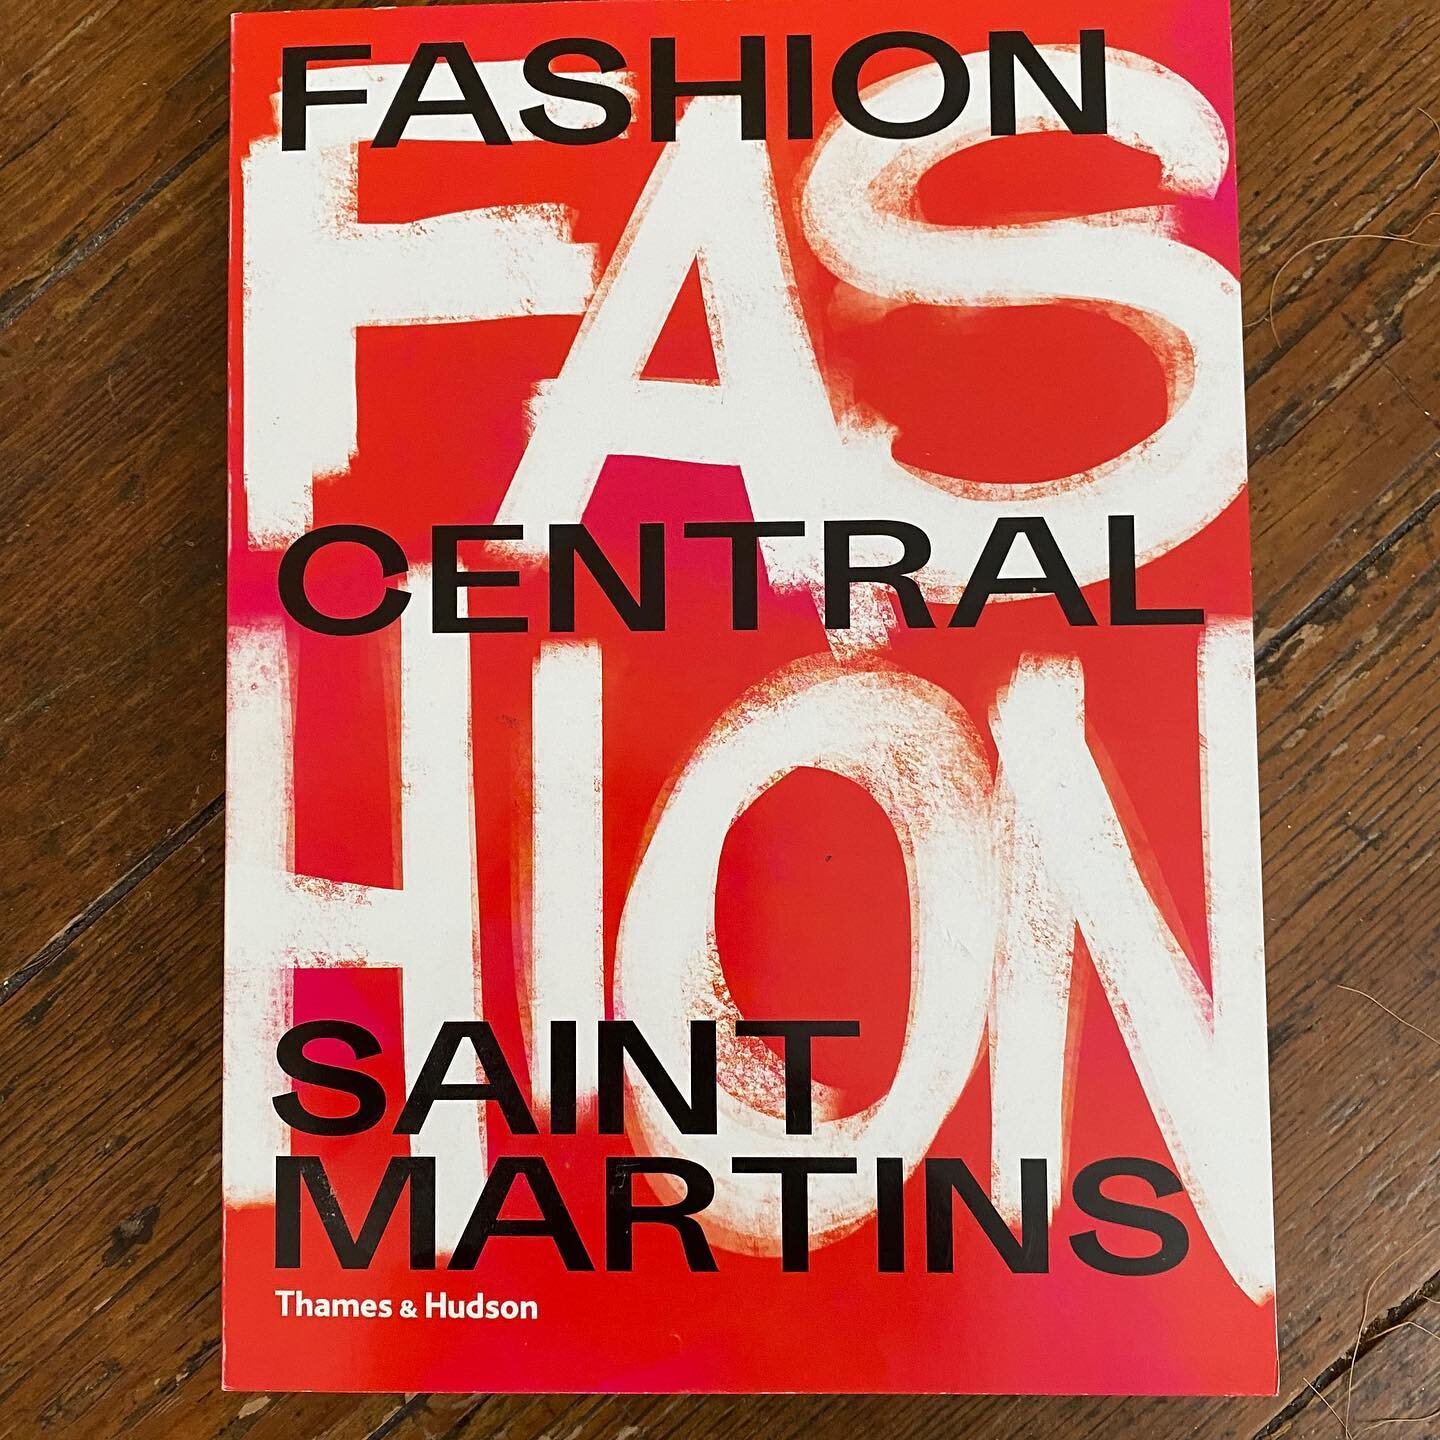 &lsquo;Fashion Central Saint Martins&rsquo; - Contributing photographer to this new book celebrating the rich 87 year history of one of the world&rsquo;s most famous fashion schools. In 2010 I was commissioned by the College to record the building be